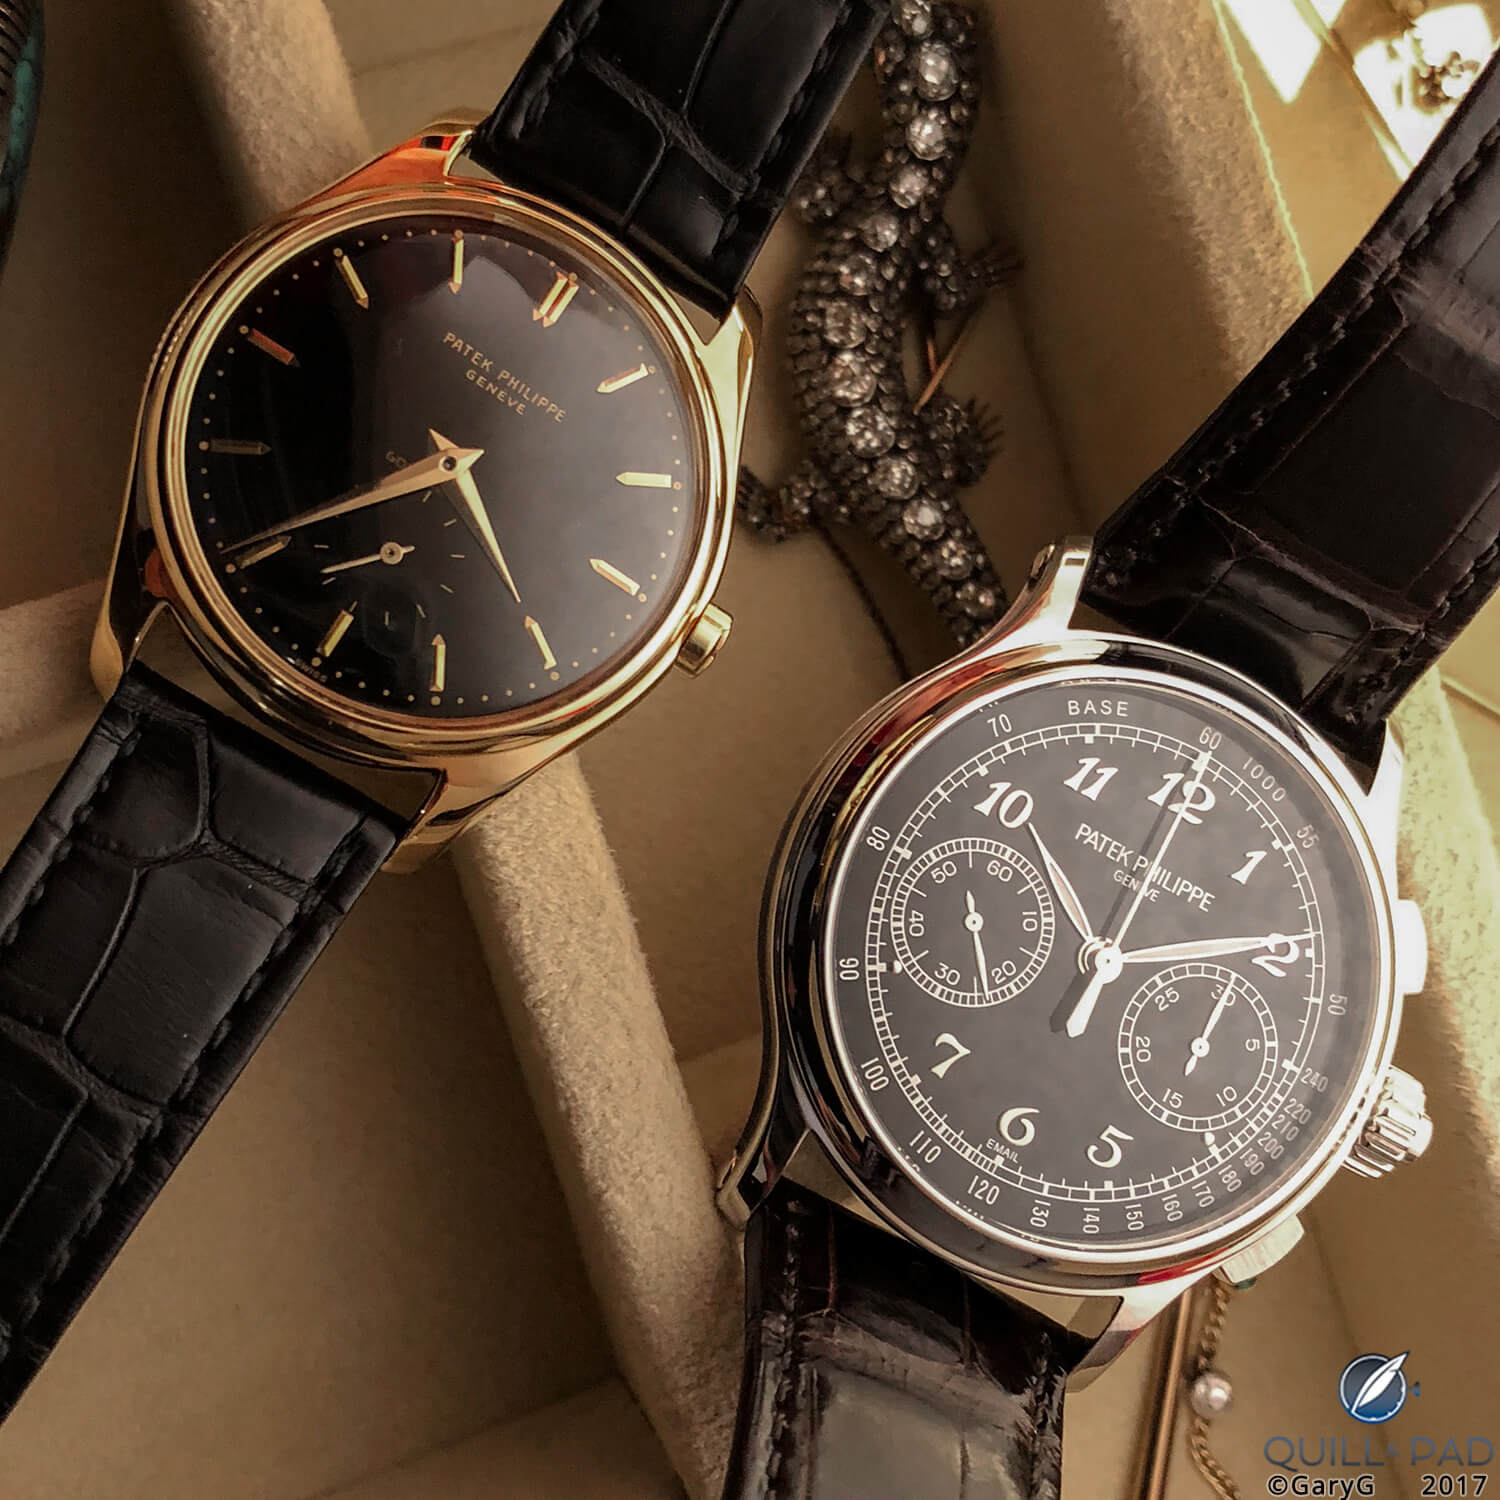 Black enamel then and now: the author’s Patek Philippe Reference 2526 and Reference 5370P